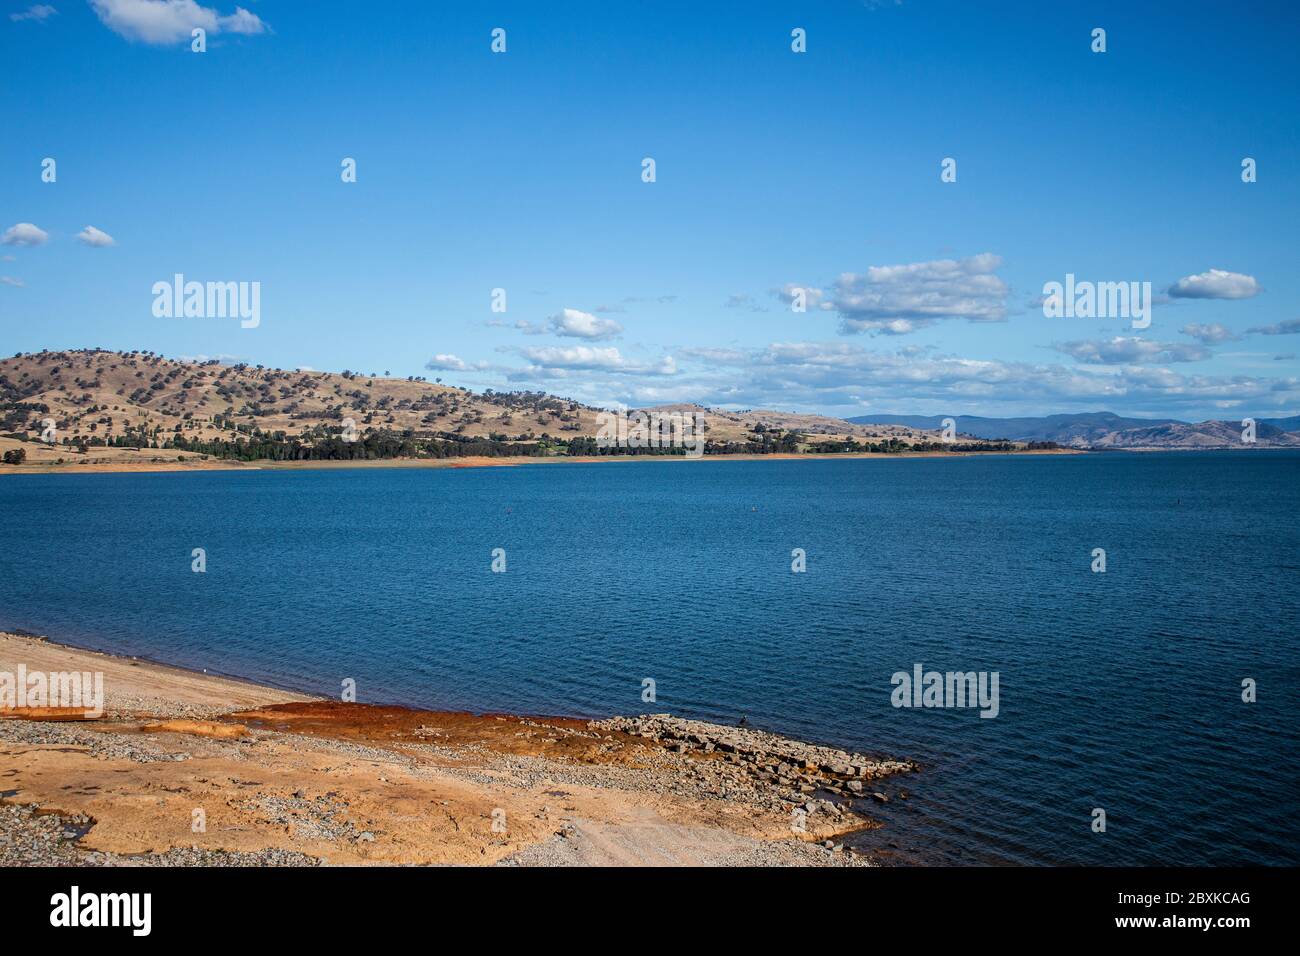 One of largest dams in world, Hume Dam across Murray River, New South Wales, Australia Stock Photo